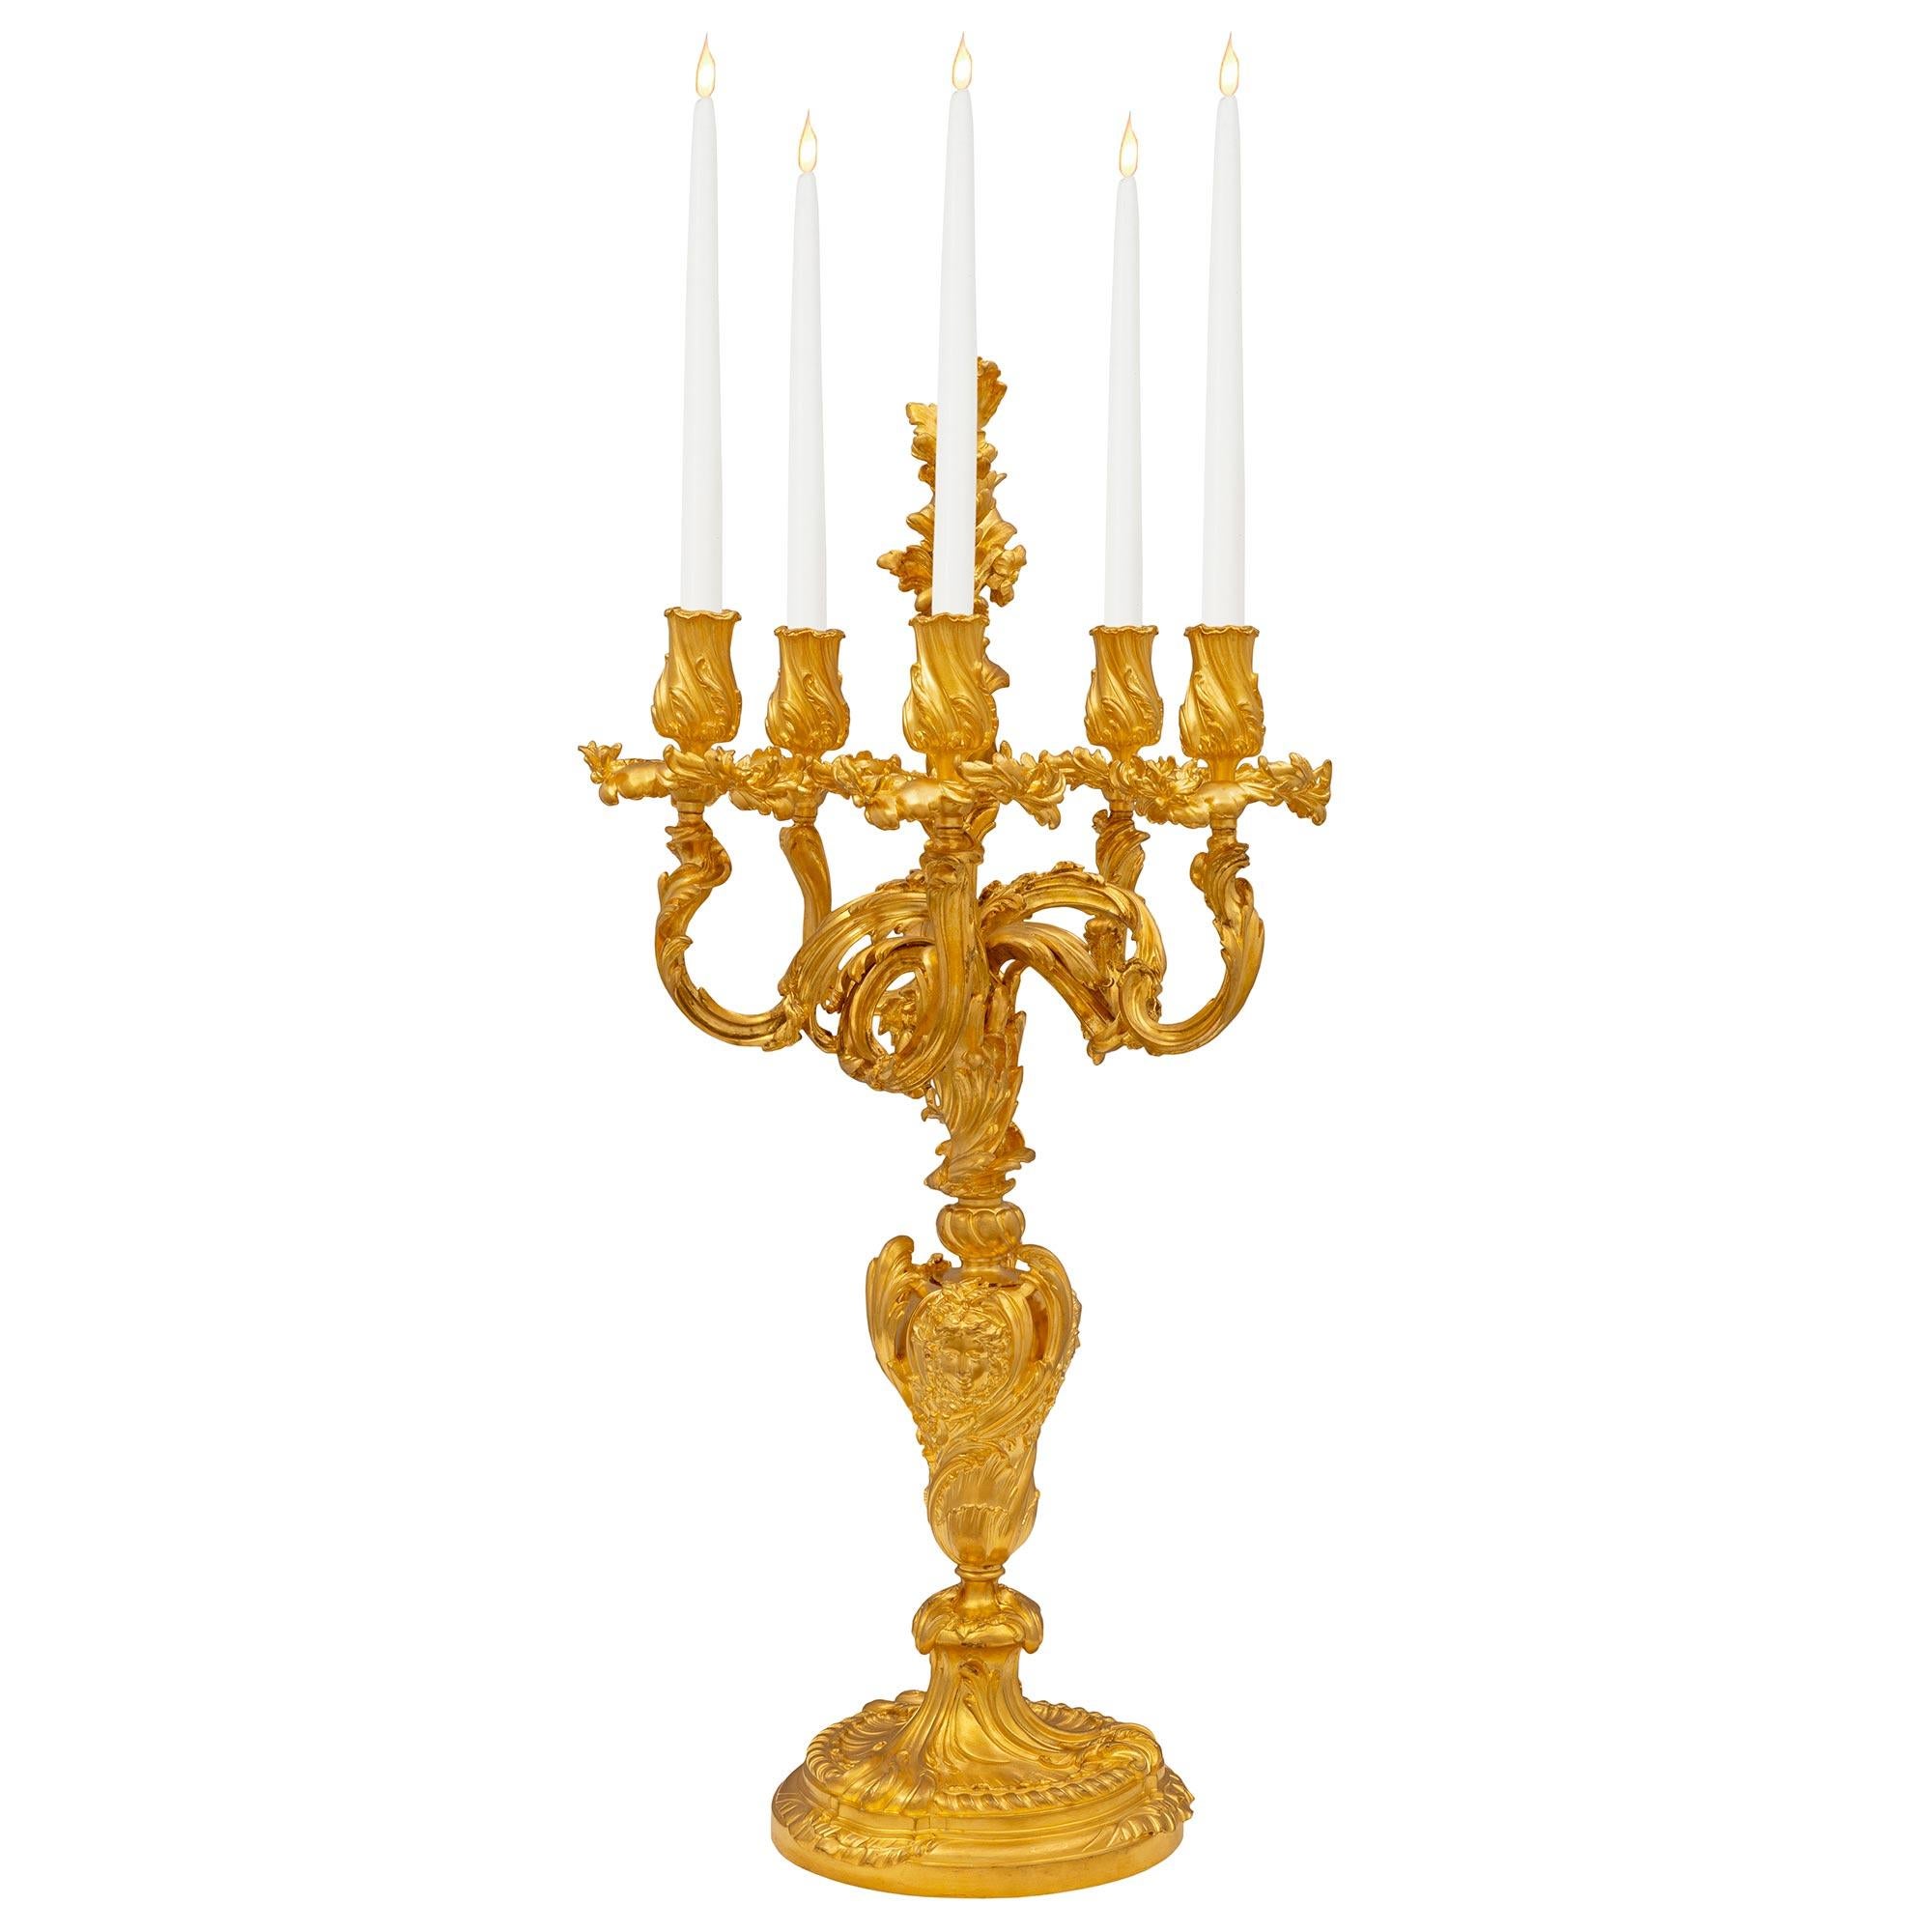 A stunning and monumentally scaled pair of French 19th century Louis XV st. ormolu candelabras, signed Germain. Each uniquely designed five arm candelabra is raised by a fine mottled circular base with a lovely foliate and reeded design. The central